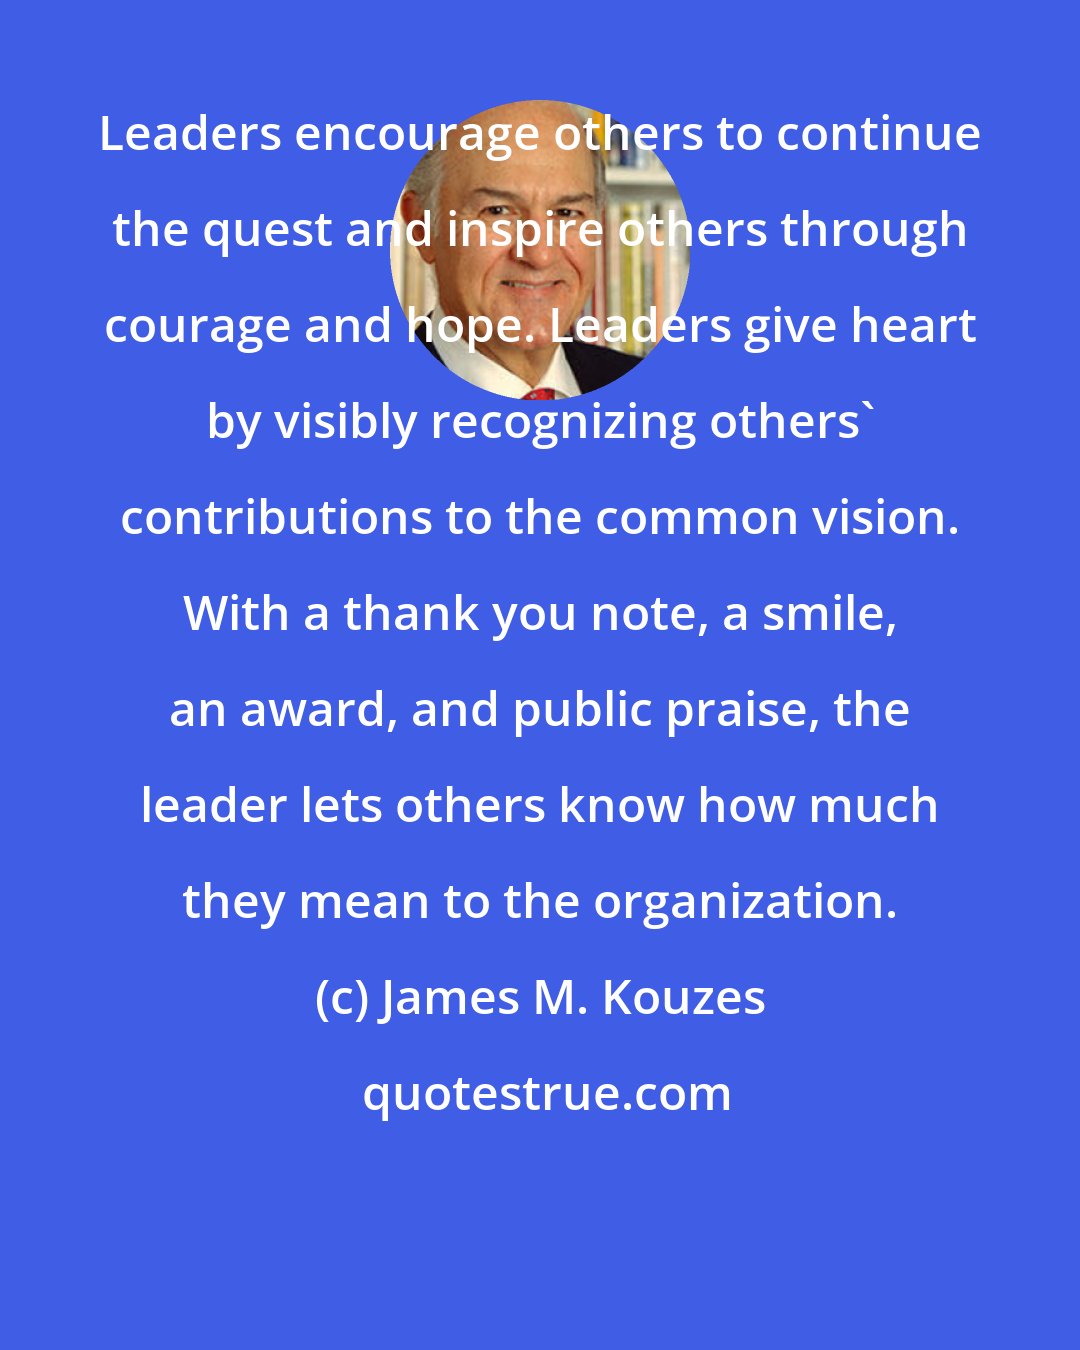 James M. Kouzes: Leaders encourage others to continue the quest and inspire others through courage and hope. Leaders give heart by visibly recognizing others' contributions to the common vision. With a thank you note, a smile, an award, and public praise, the leader lets others know how much they mean to the organization.